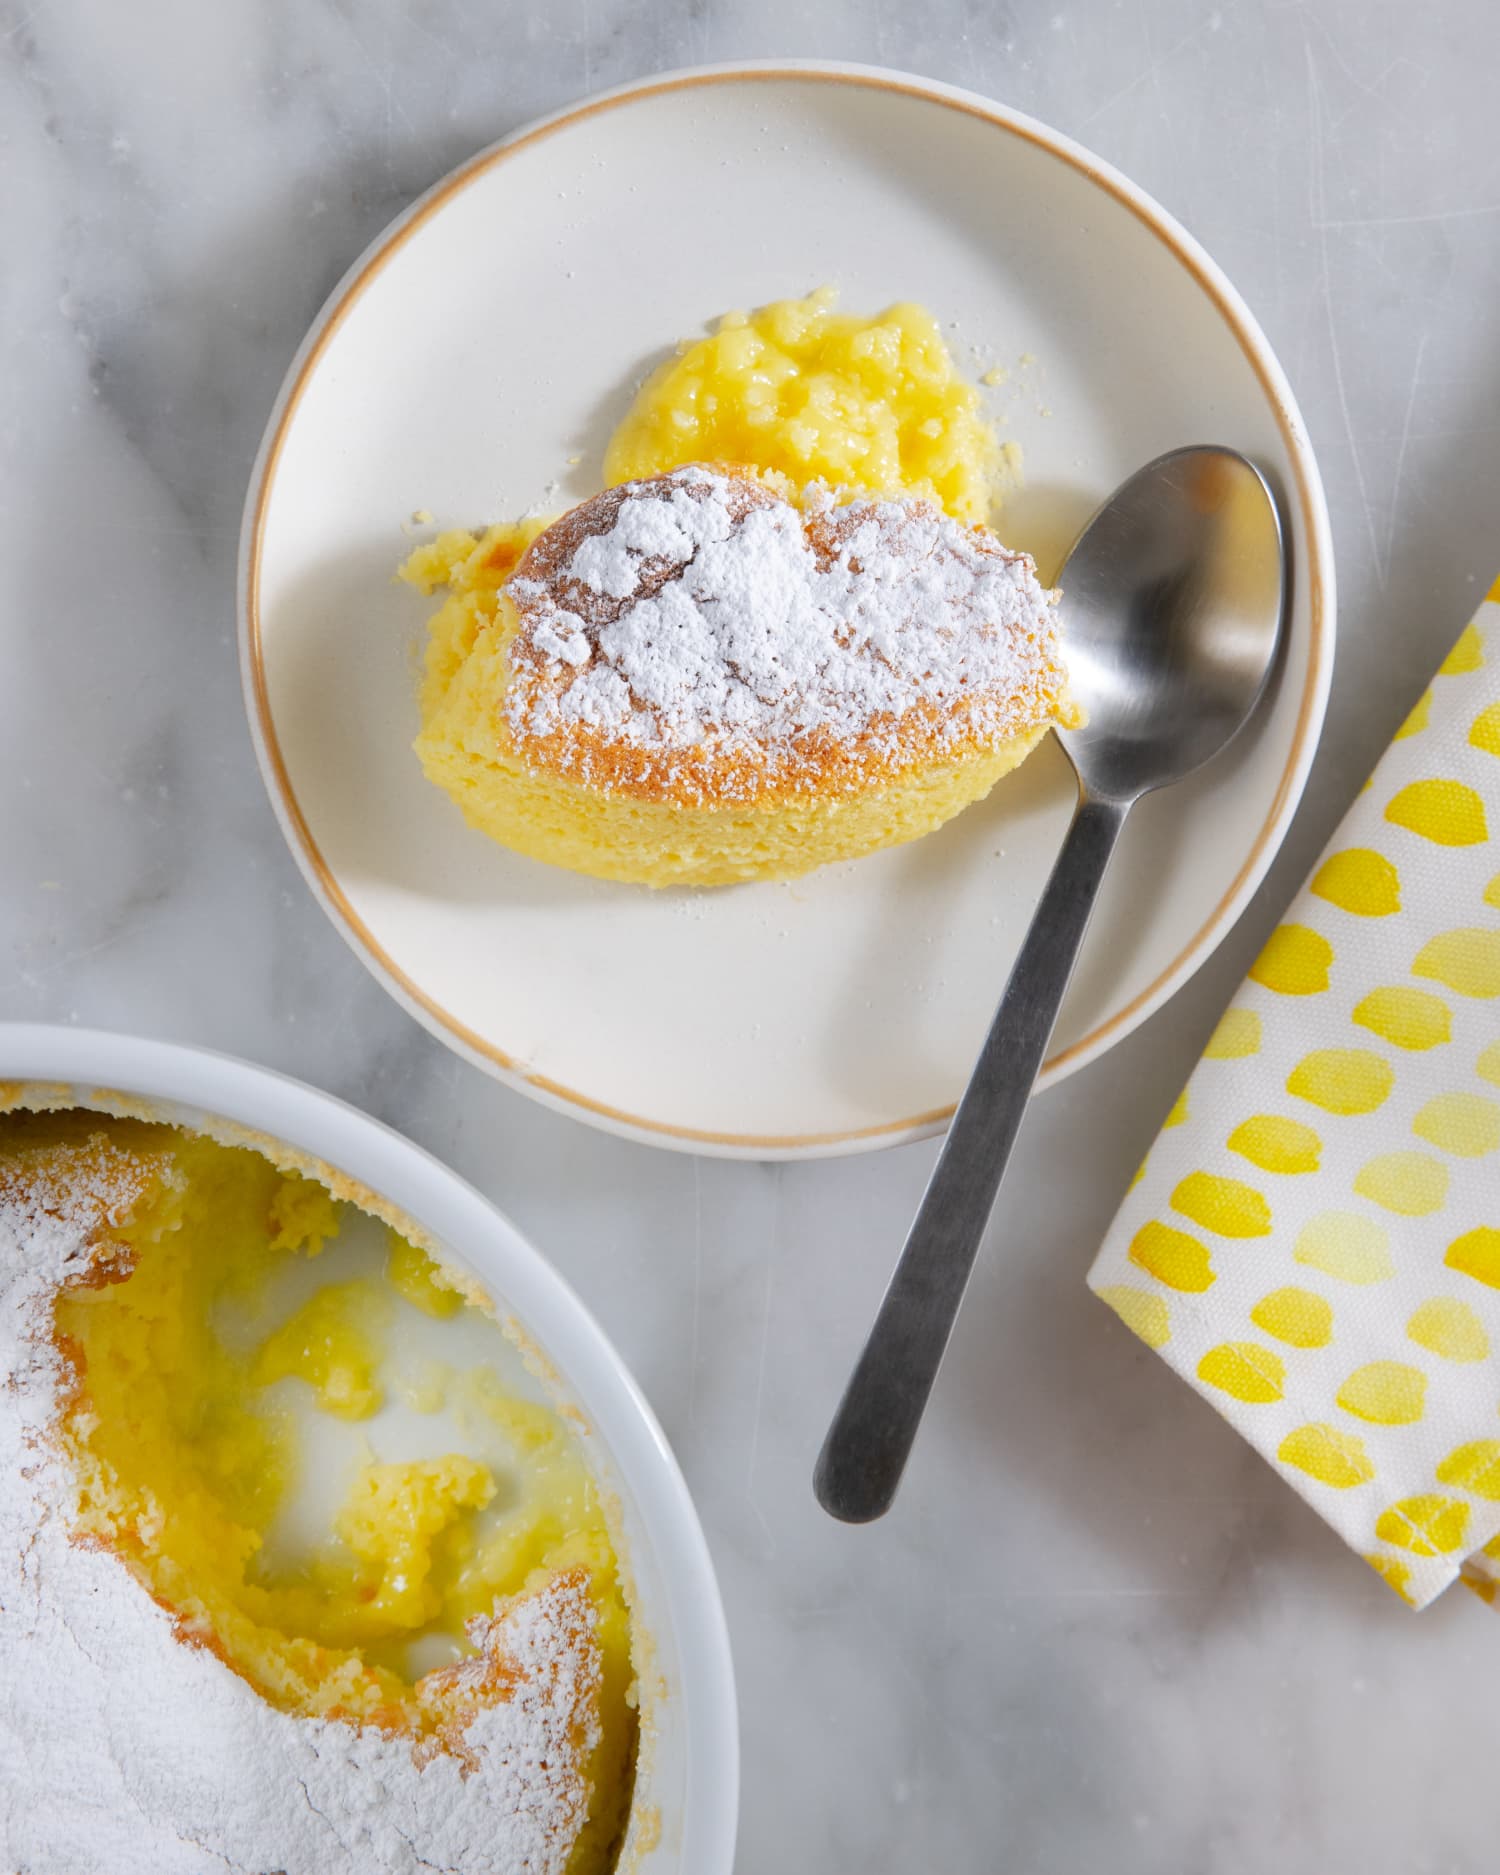 Lemon Pudding Cake Is One of the Easiest “Wow” Desserts You Can Make